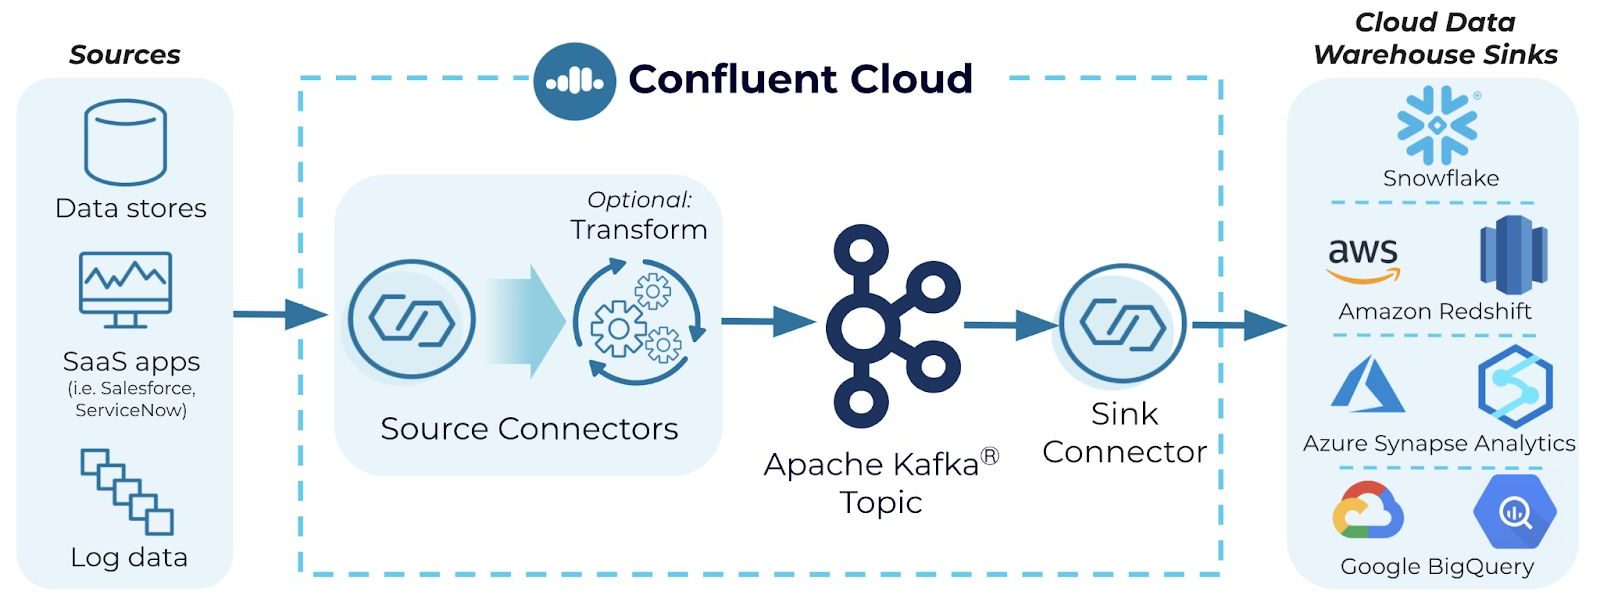 Connect to a cloud data warehouse of your choice